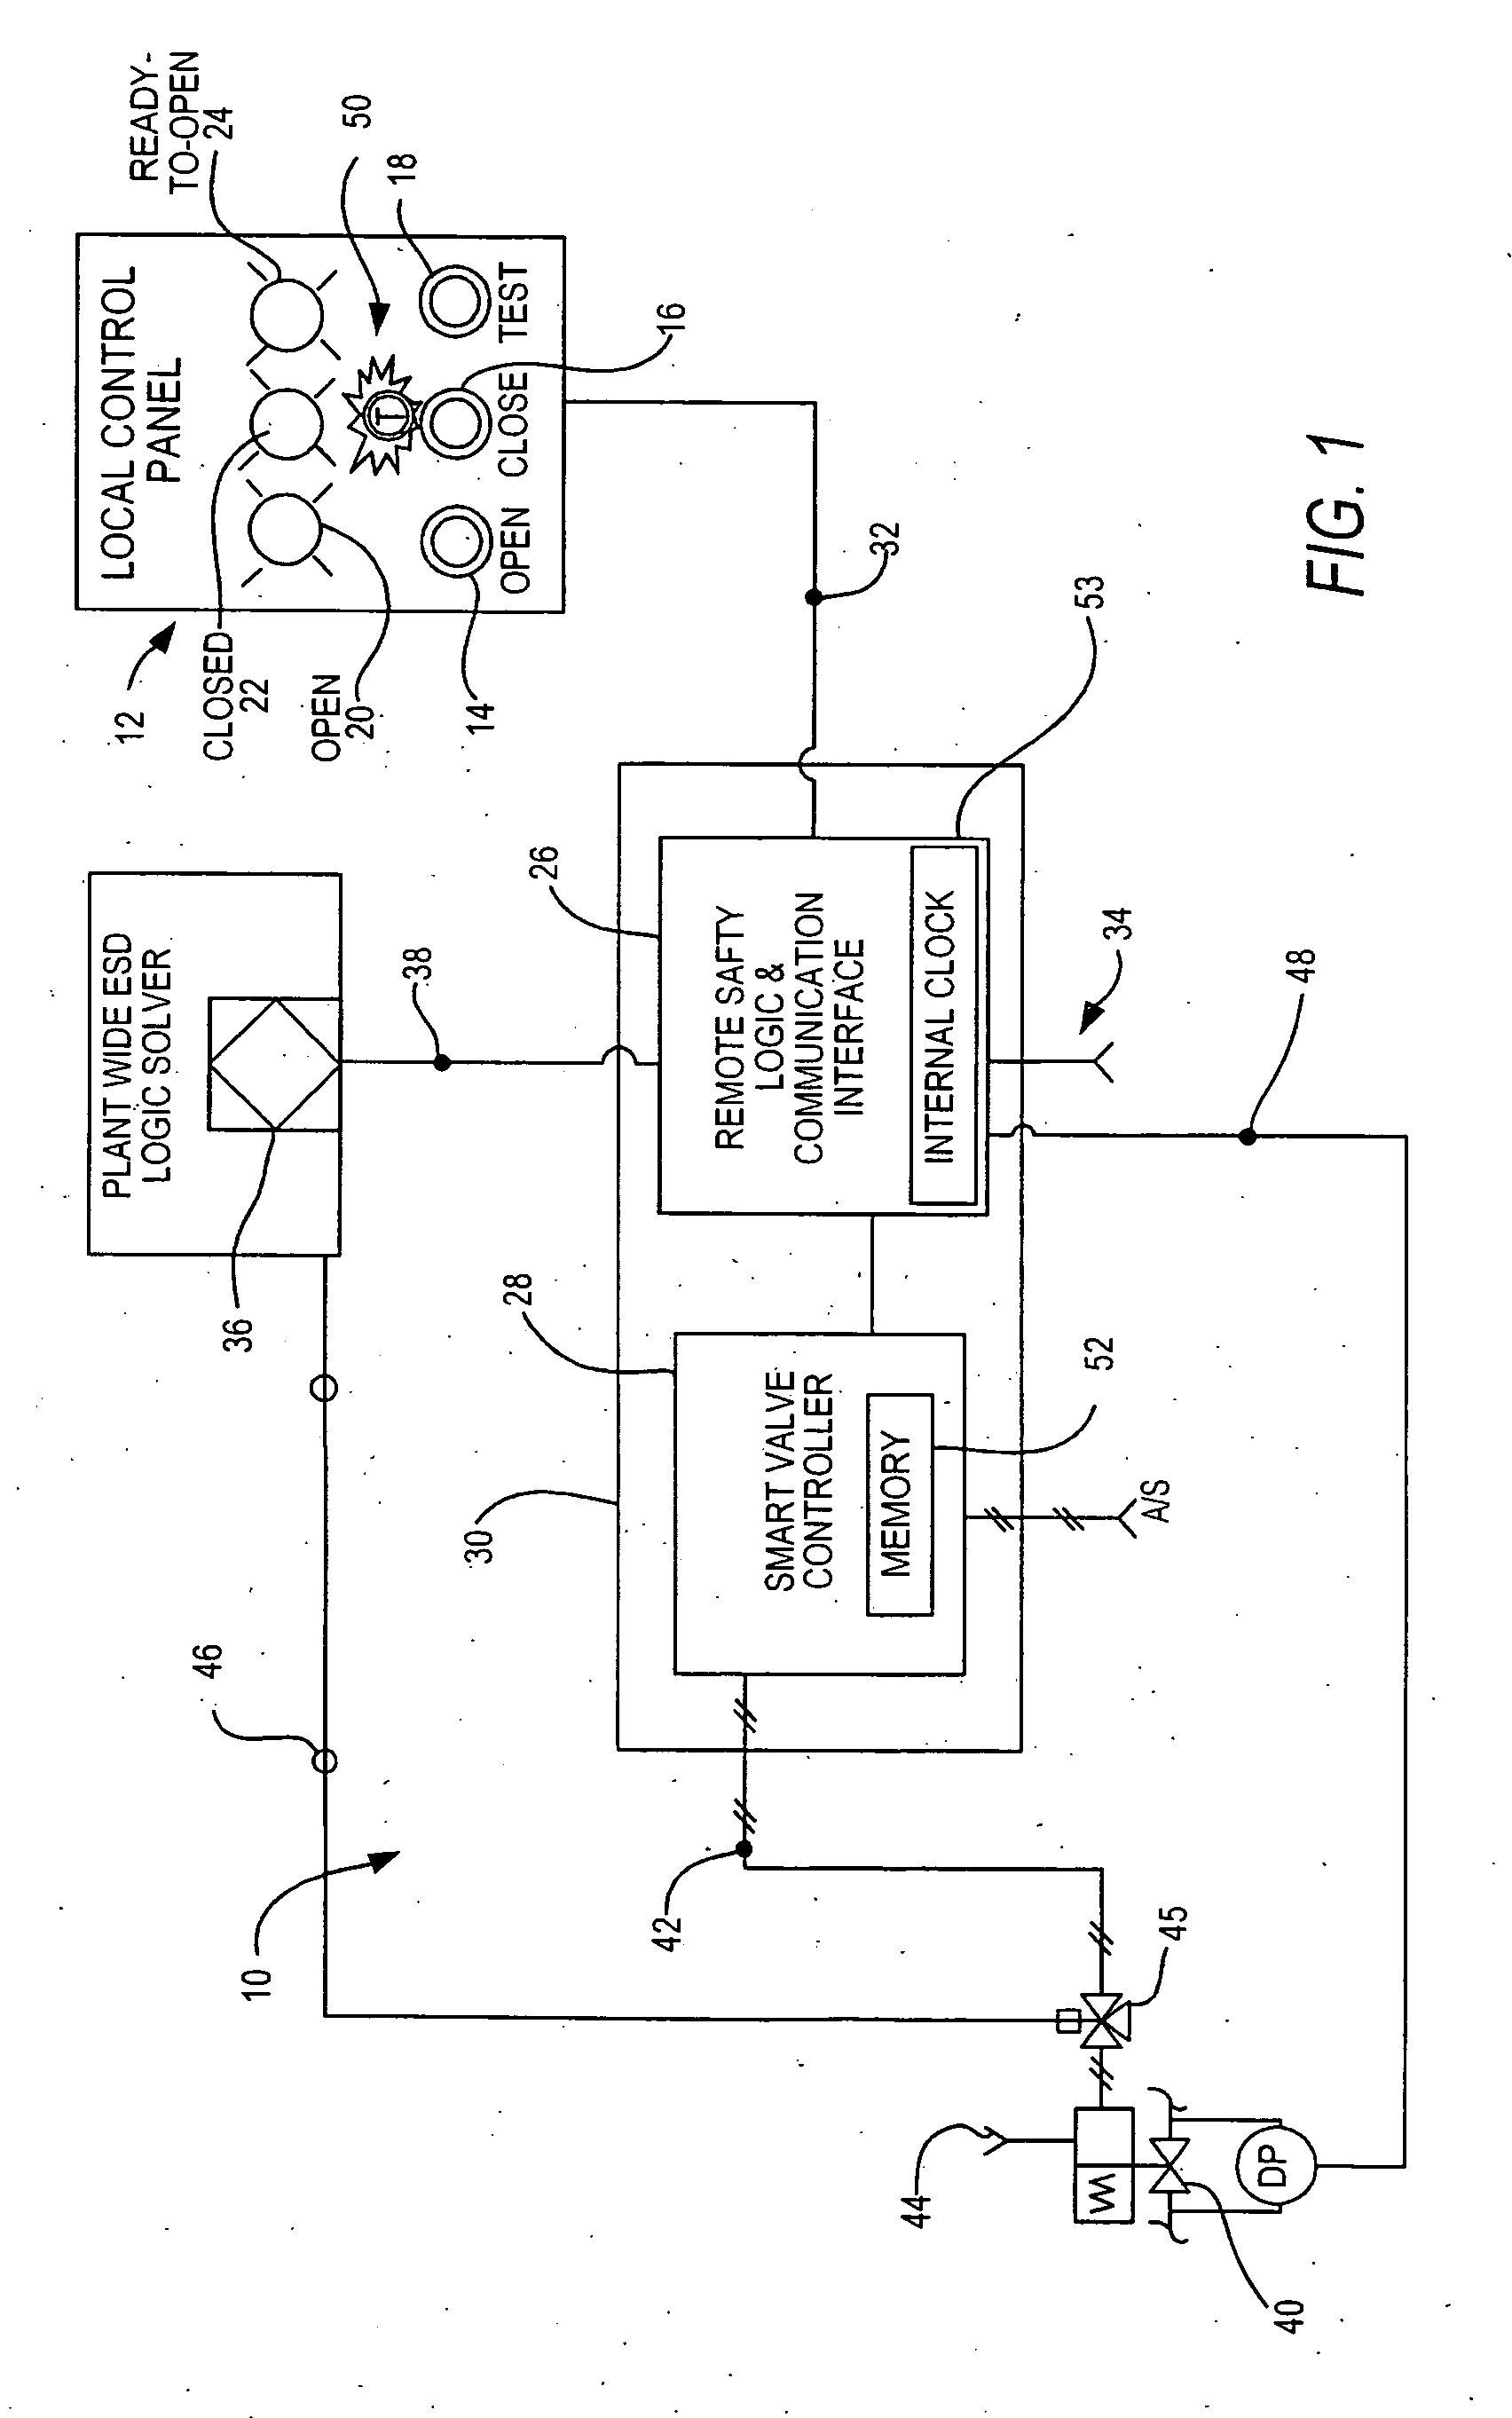 Emergency isolation valve controller with integral fault indicator